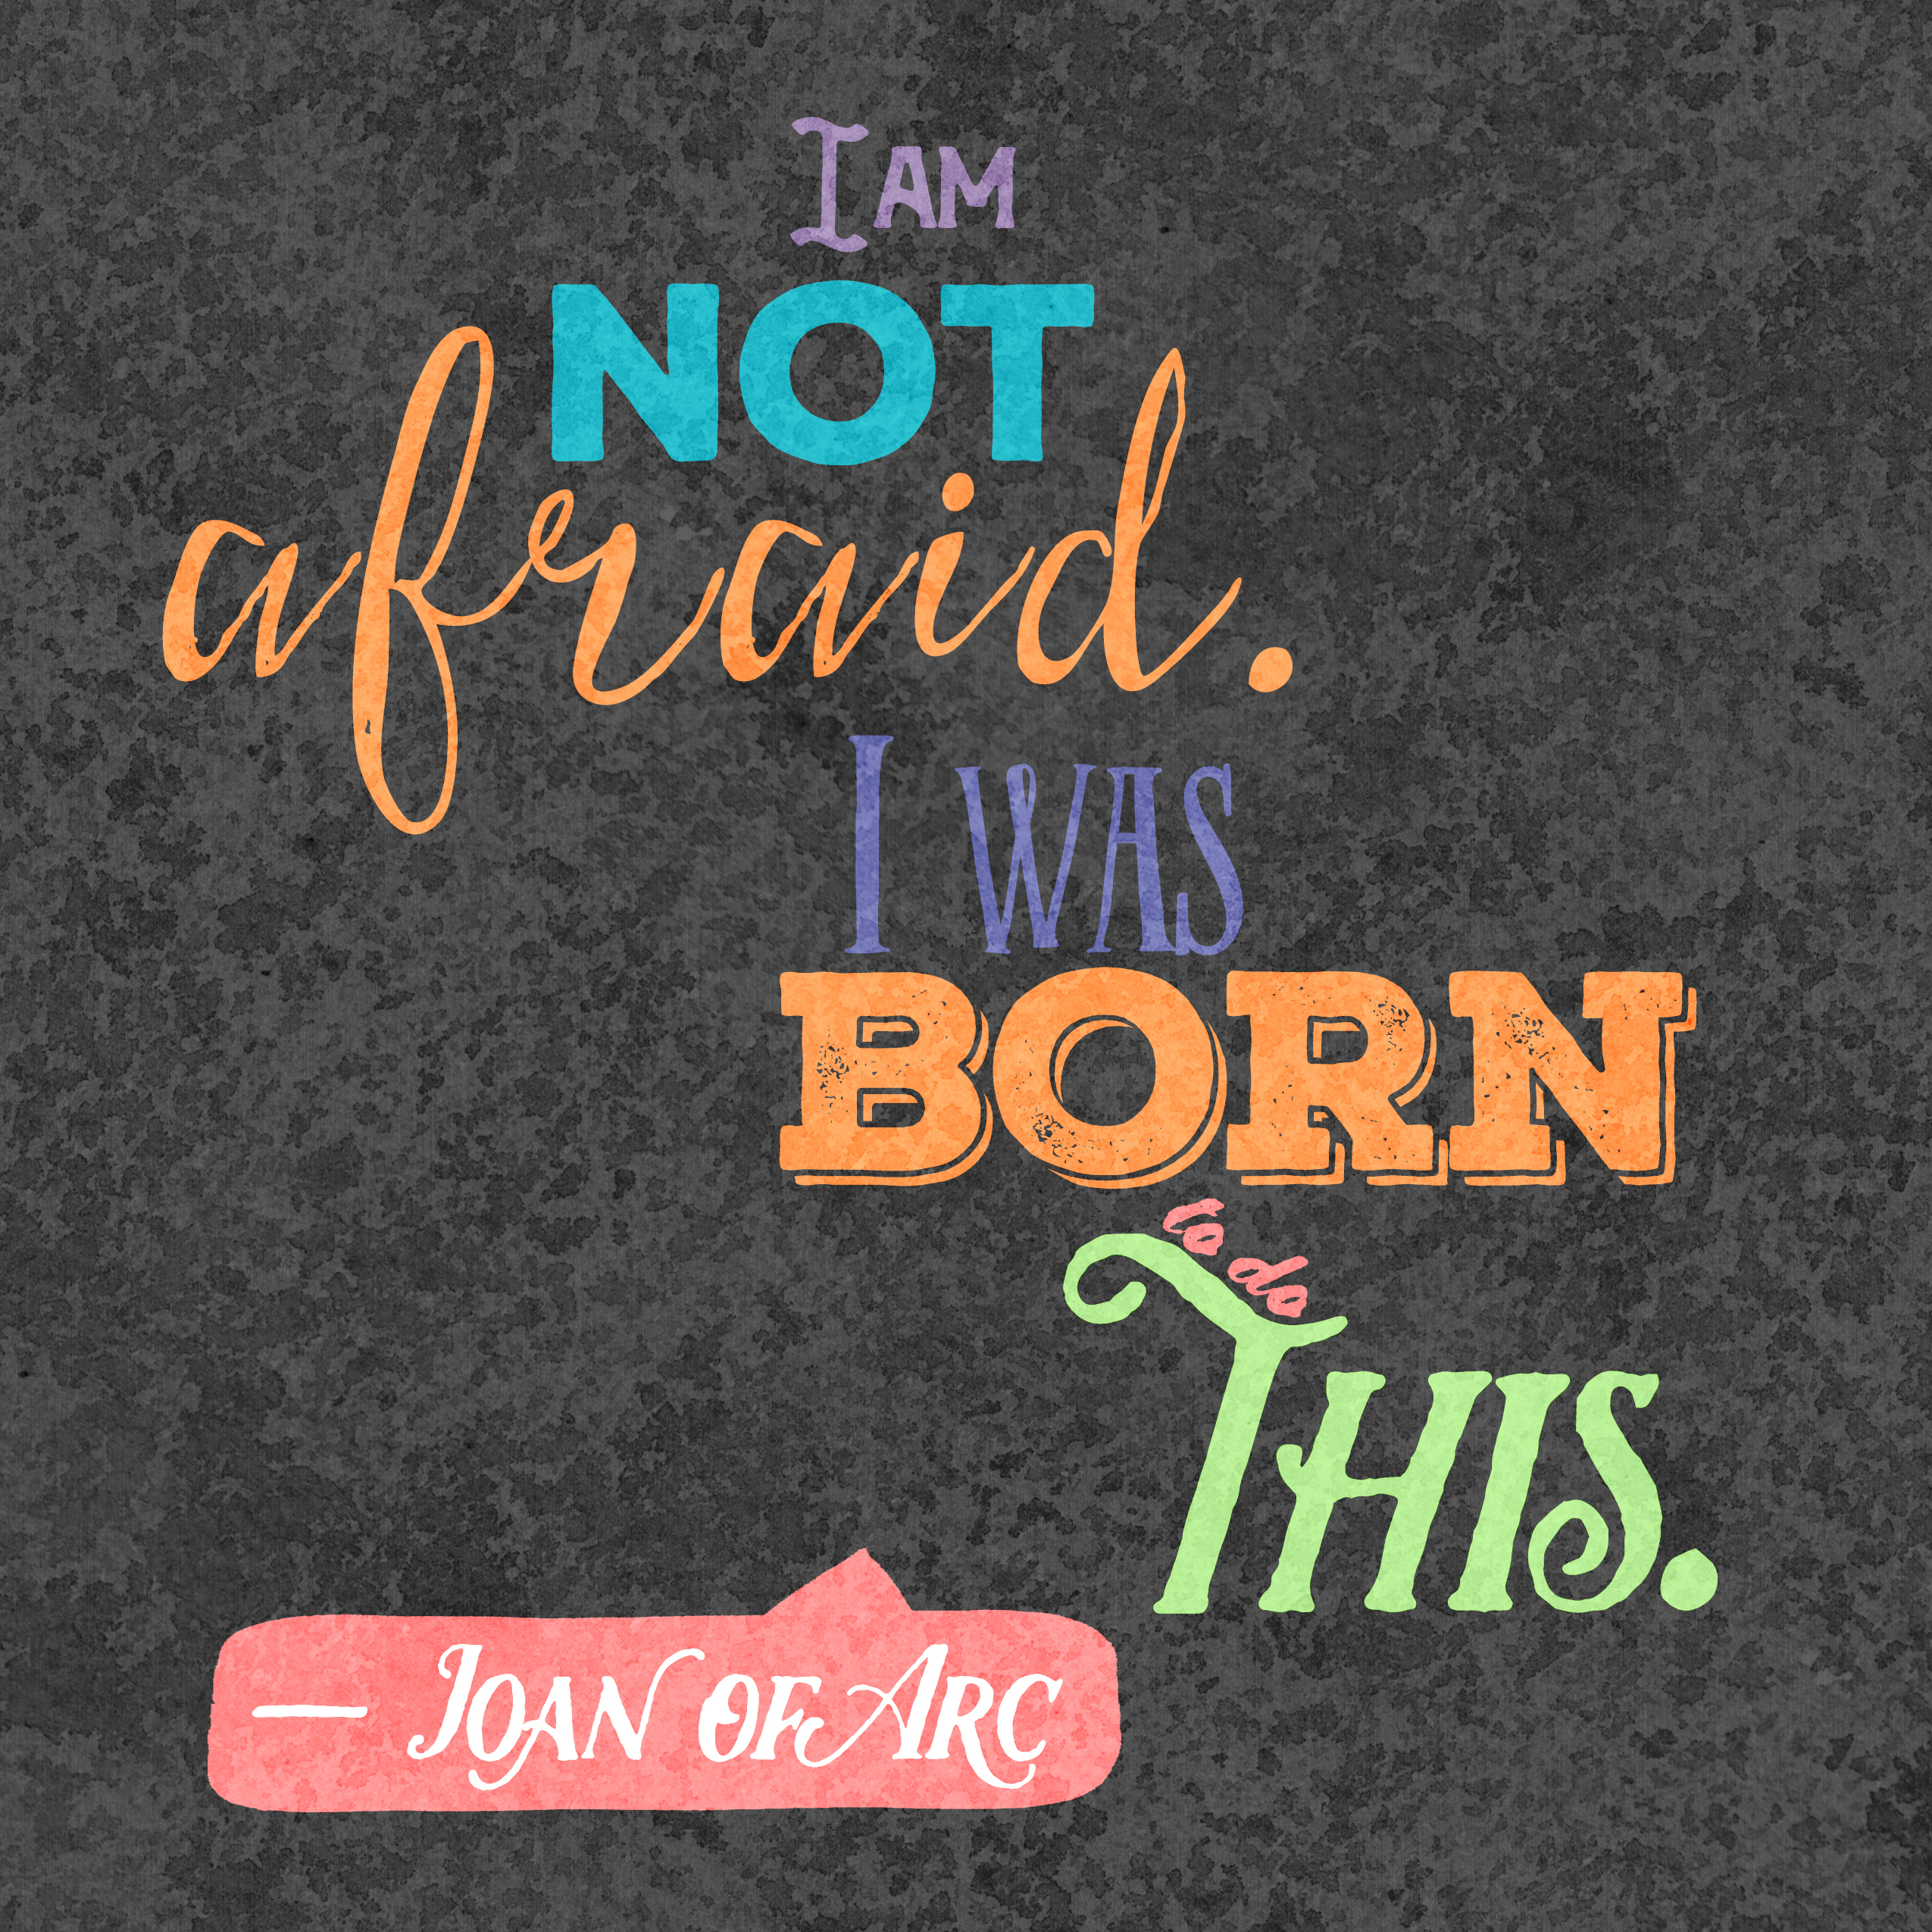 Instagram quote by Joan of Arc